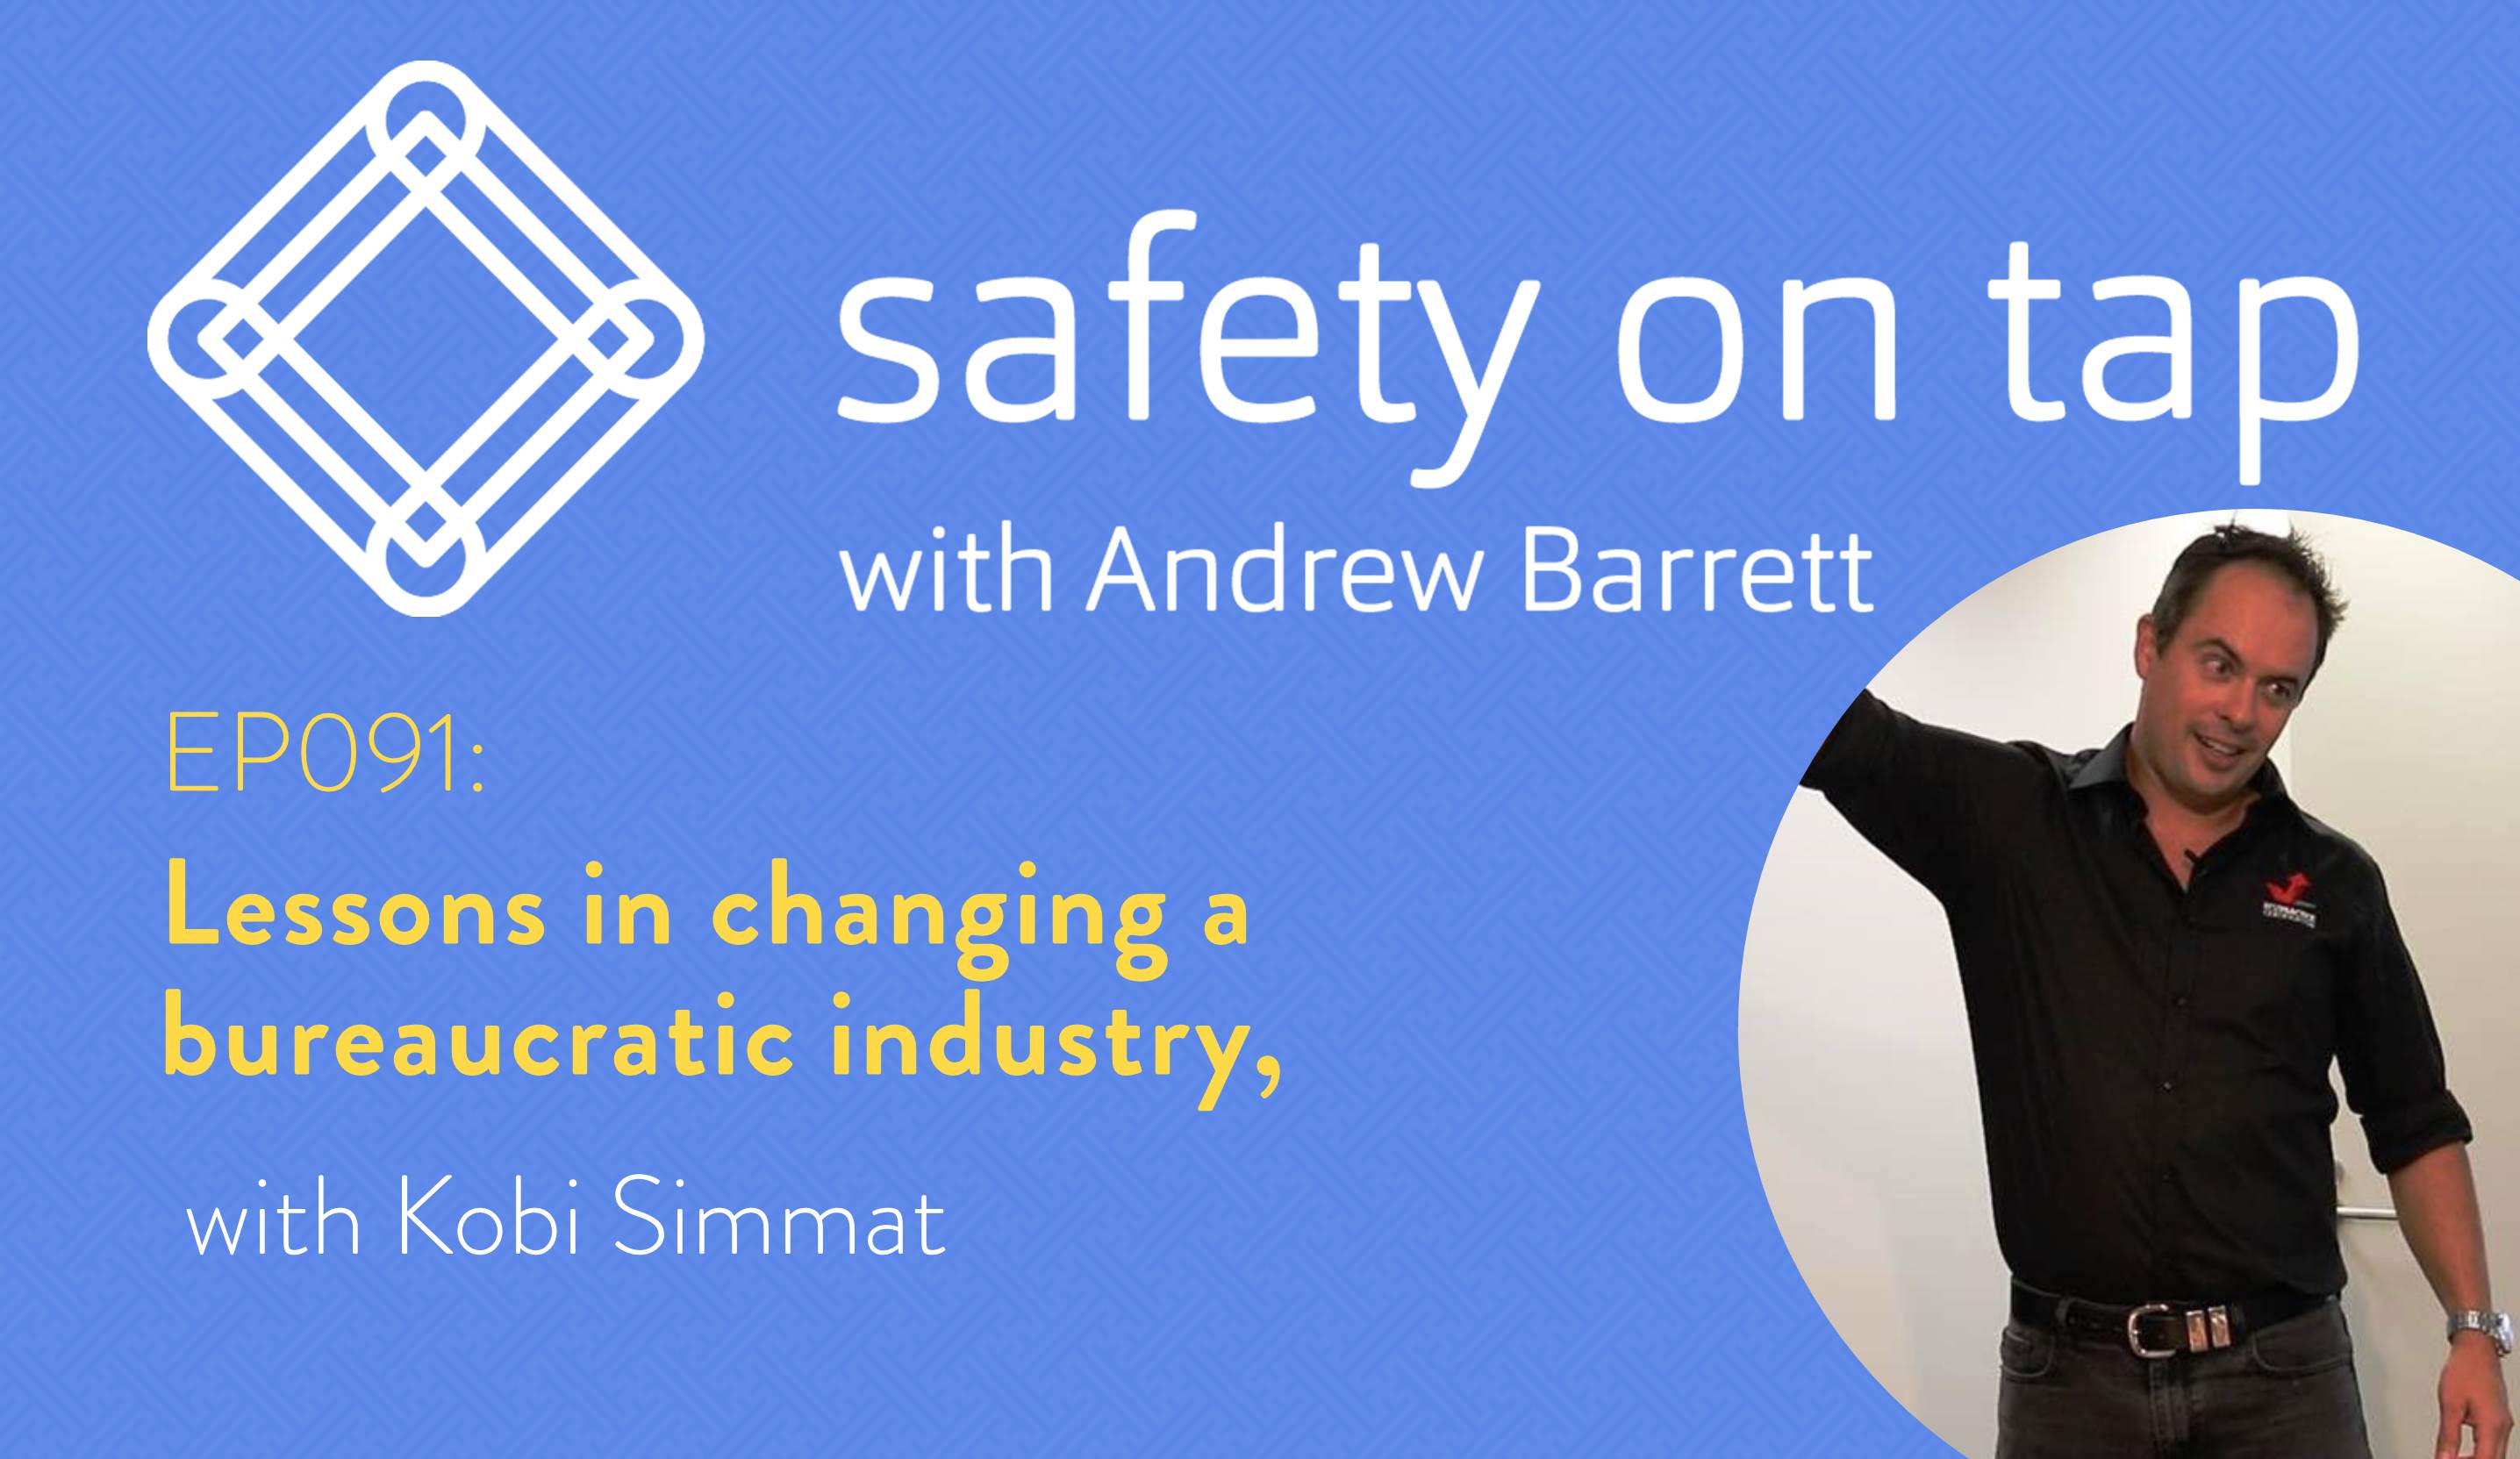 Ep091: Lessons in changing a bureaucratic industry, with Kobi Simmat